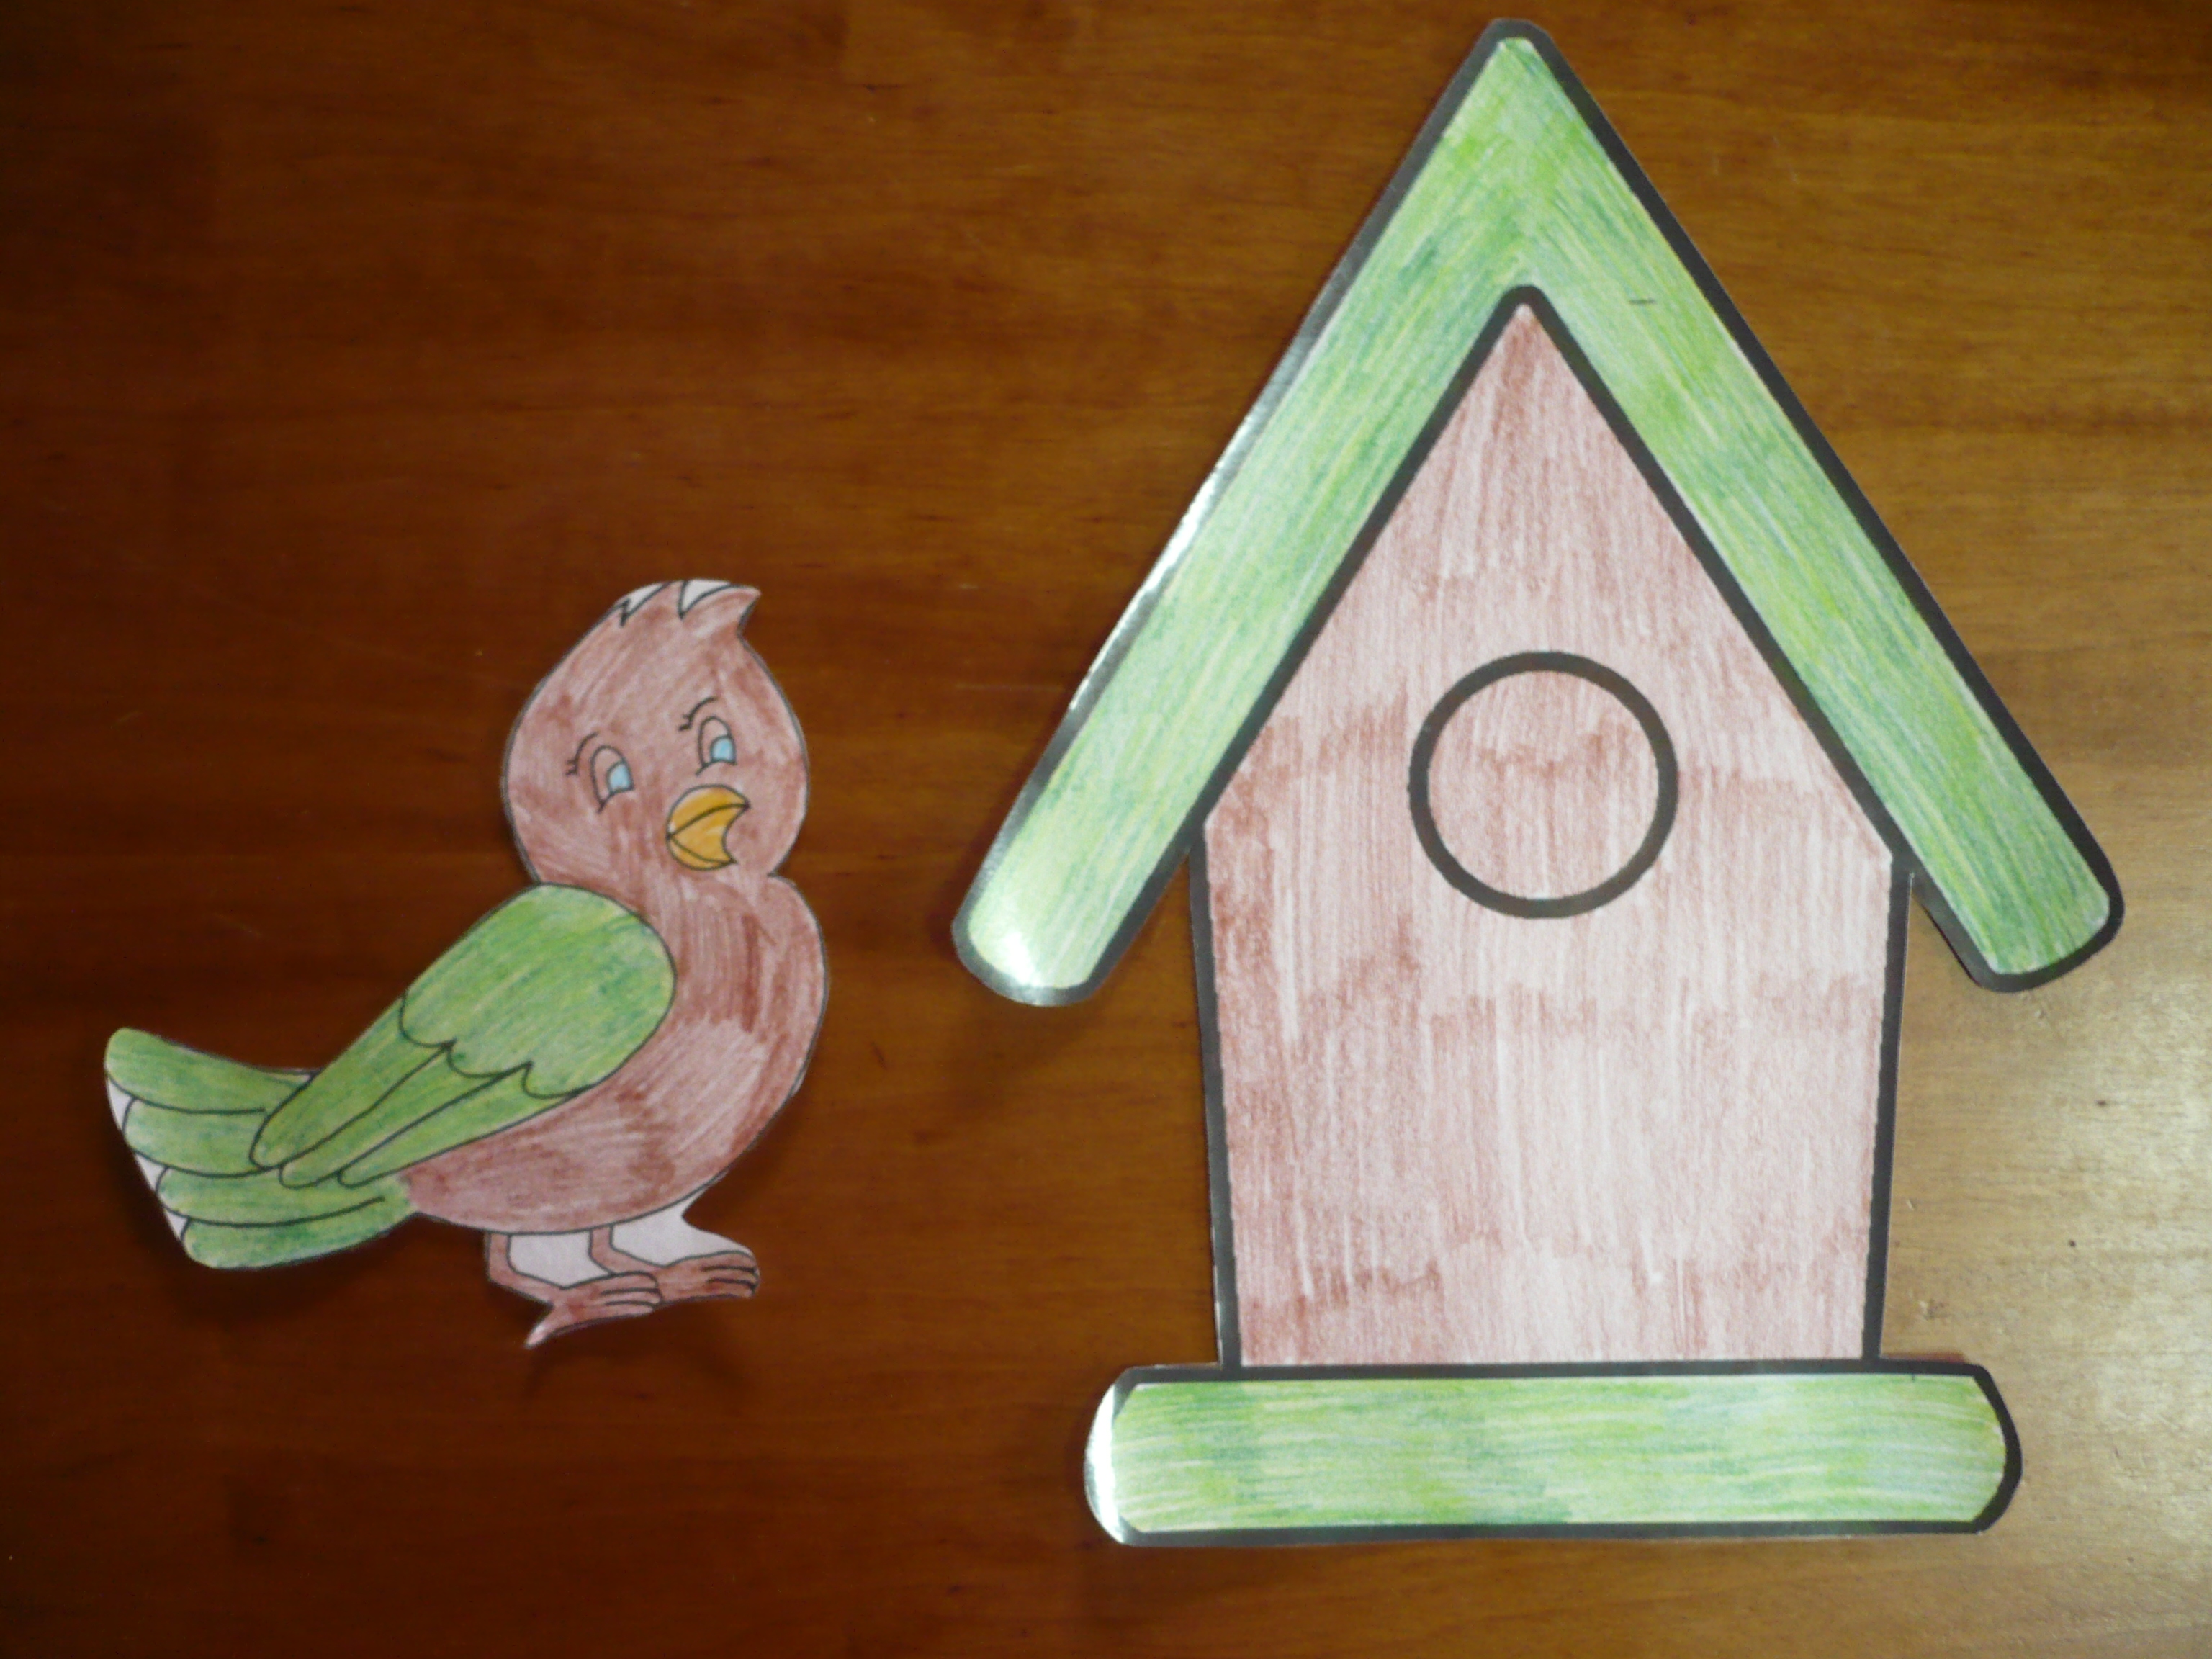 Matching Game: Birds and Houses | Fun Family Crafts3072 x 2304